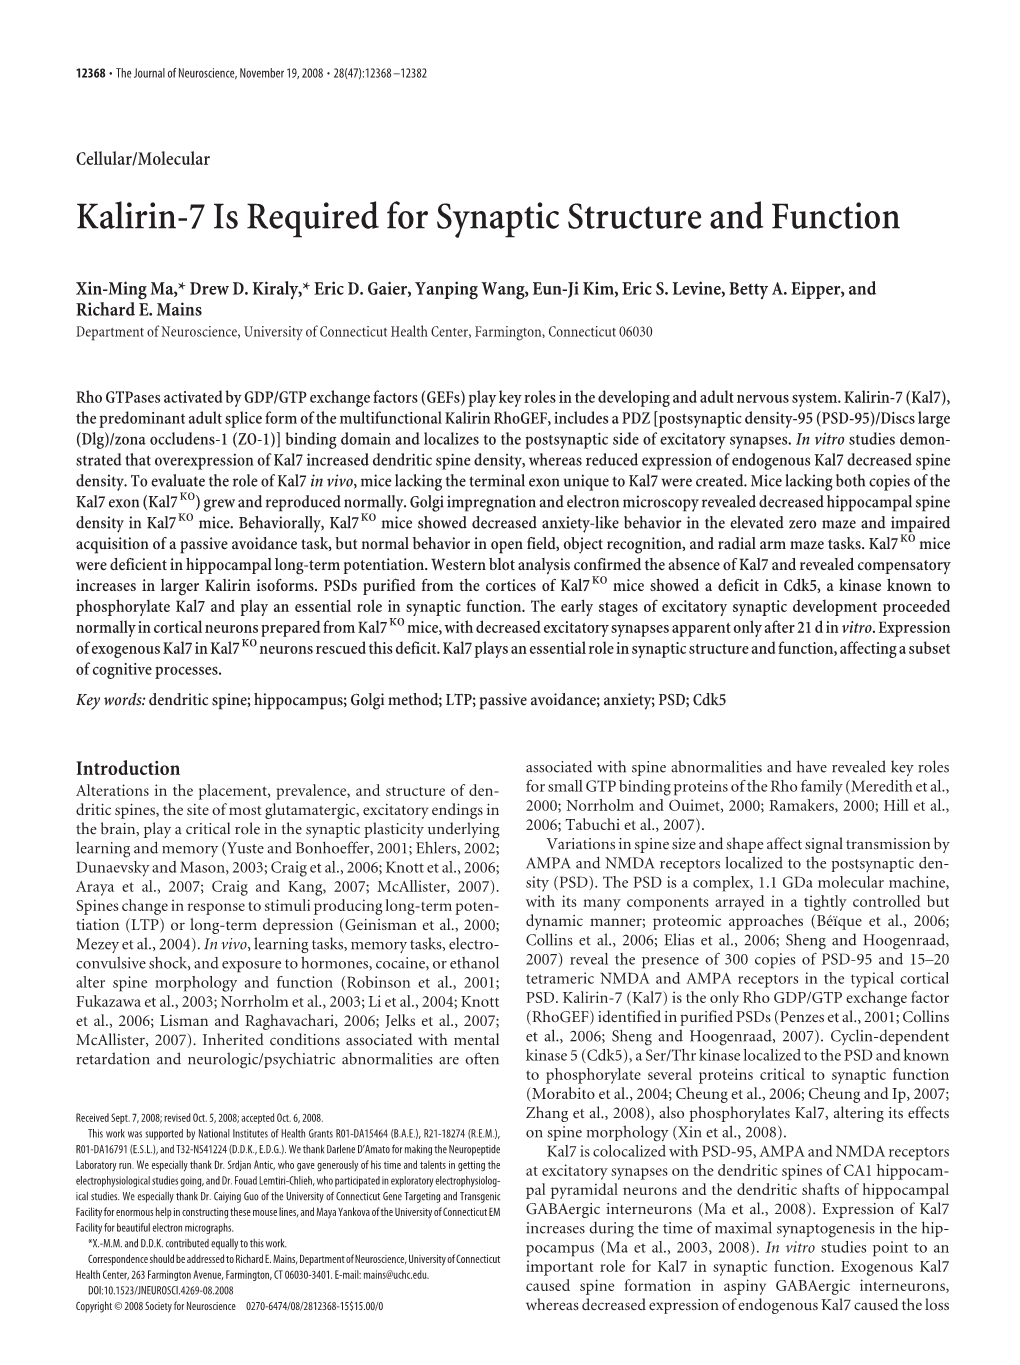 Kalirin-7 Is Required for Synaptic Structure and Function